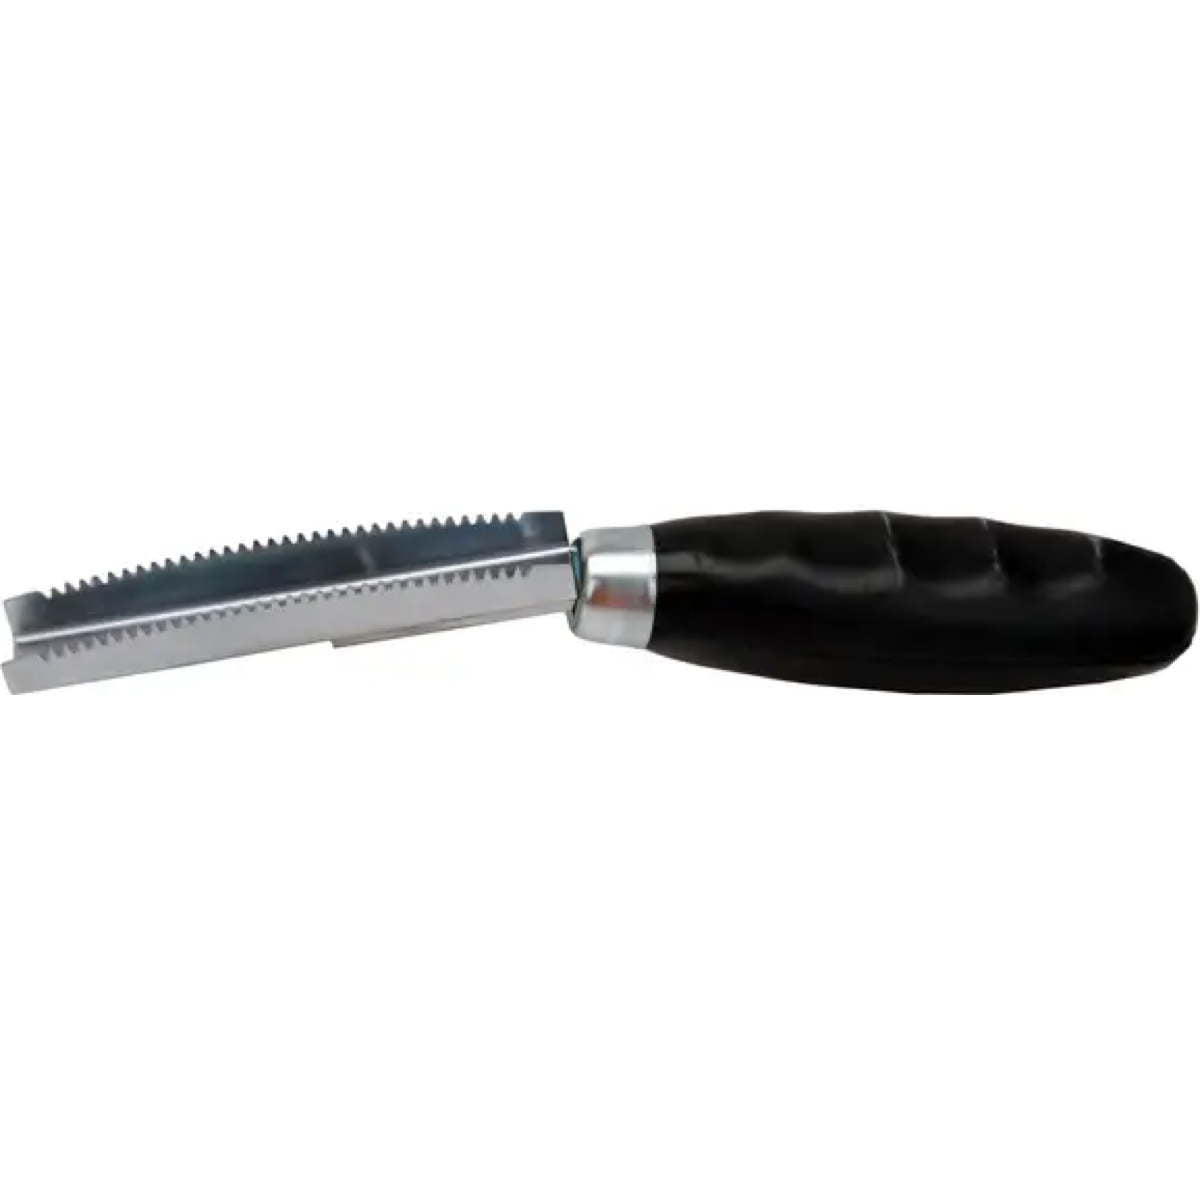 Photo of Eagle Claw Rubber Handle Fish Scaler for sale at United Tackle Shops.